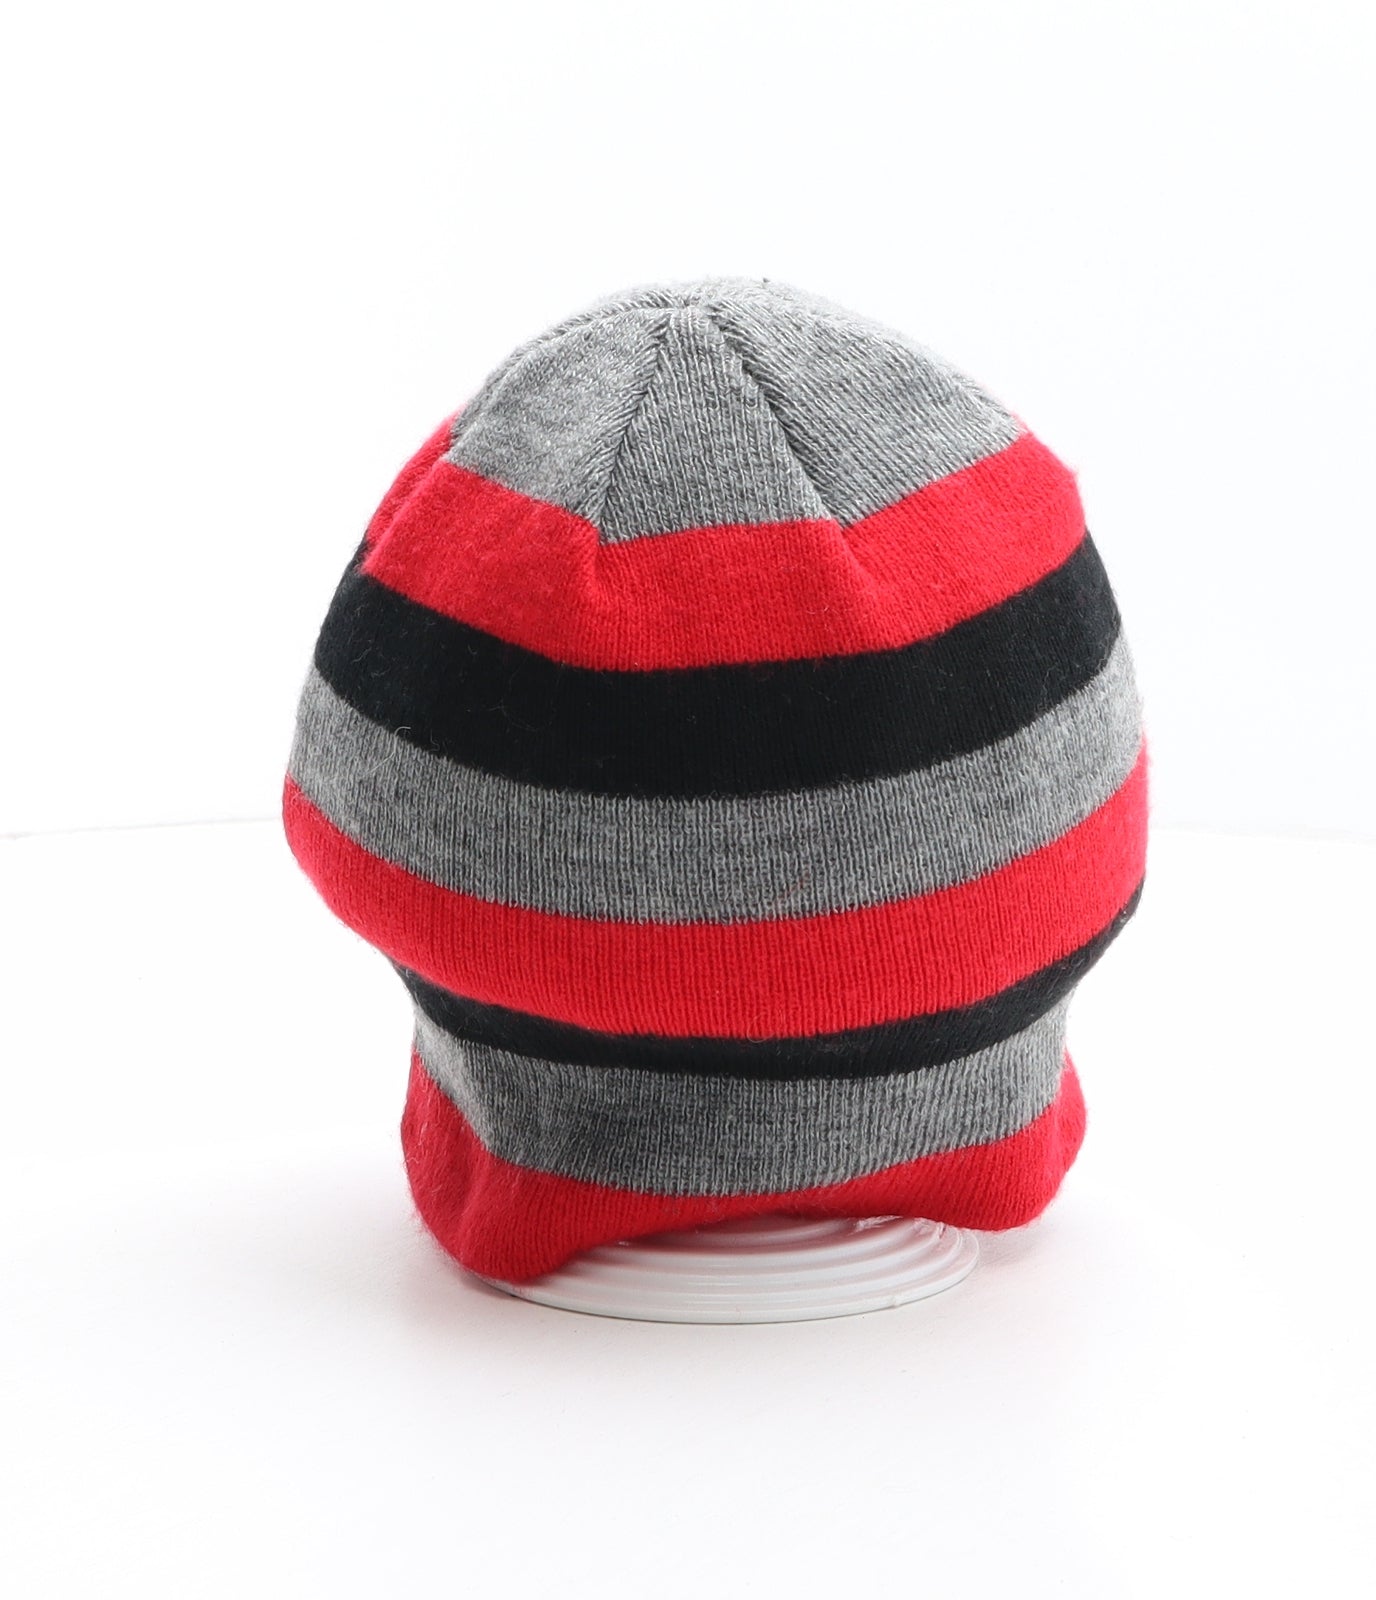 Manchester United Boys Multicoloured Striped Acrylic Beanie One Size - Manchester United